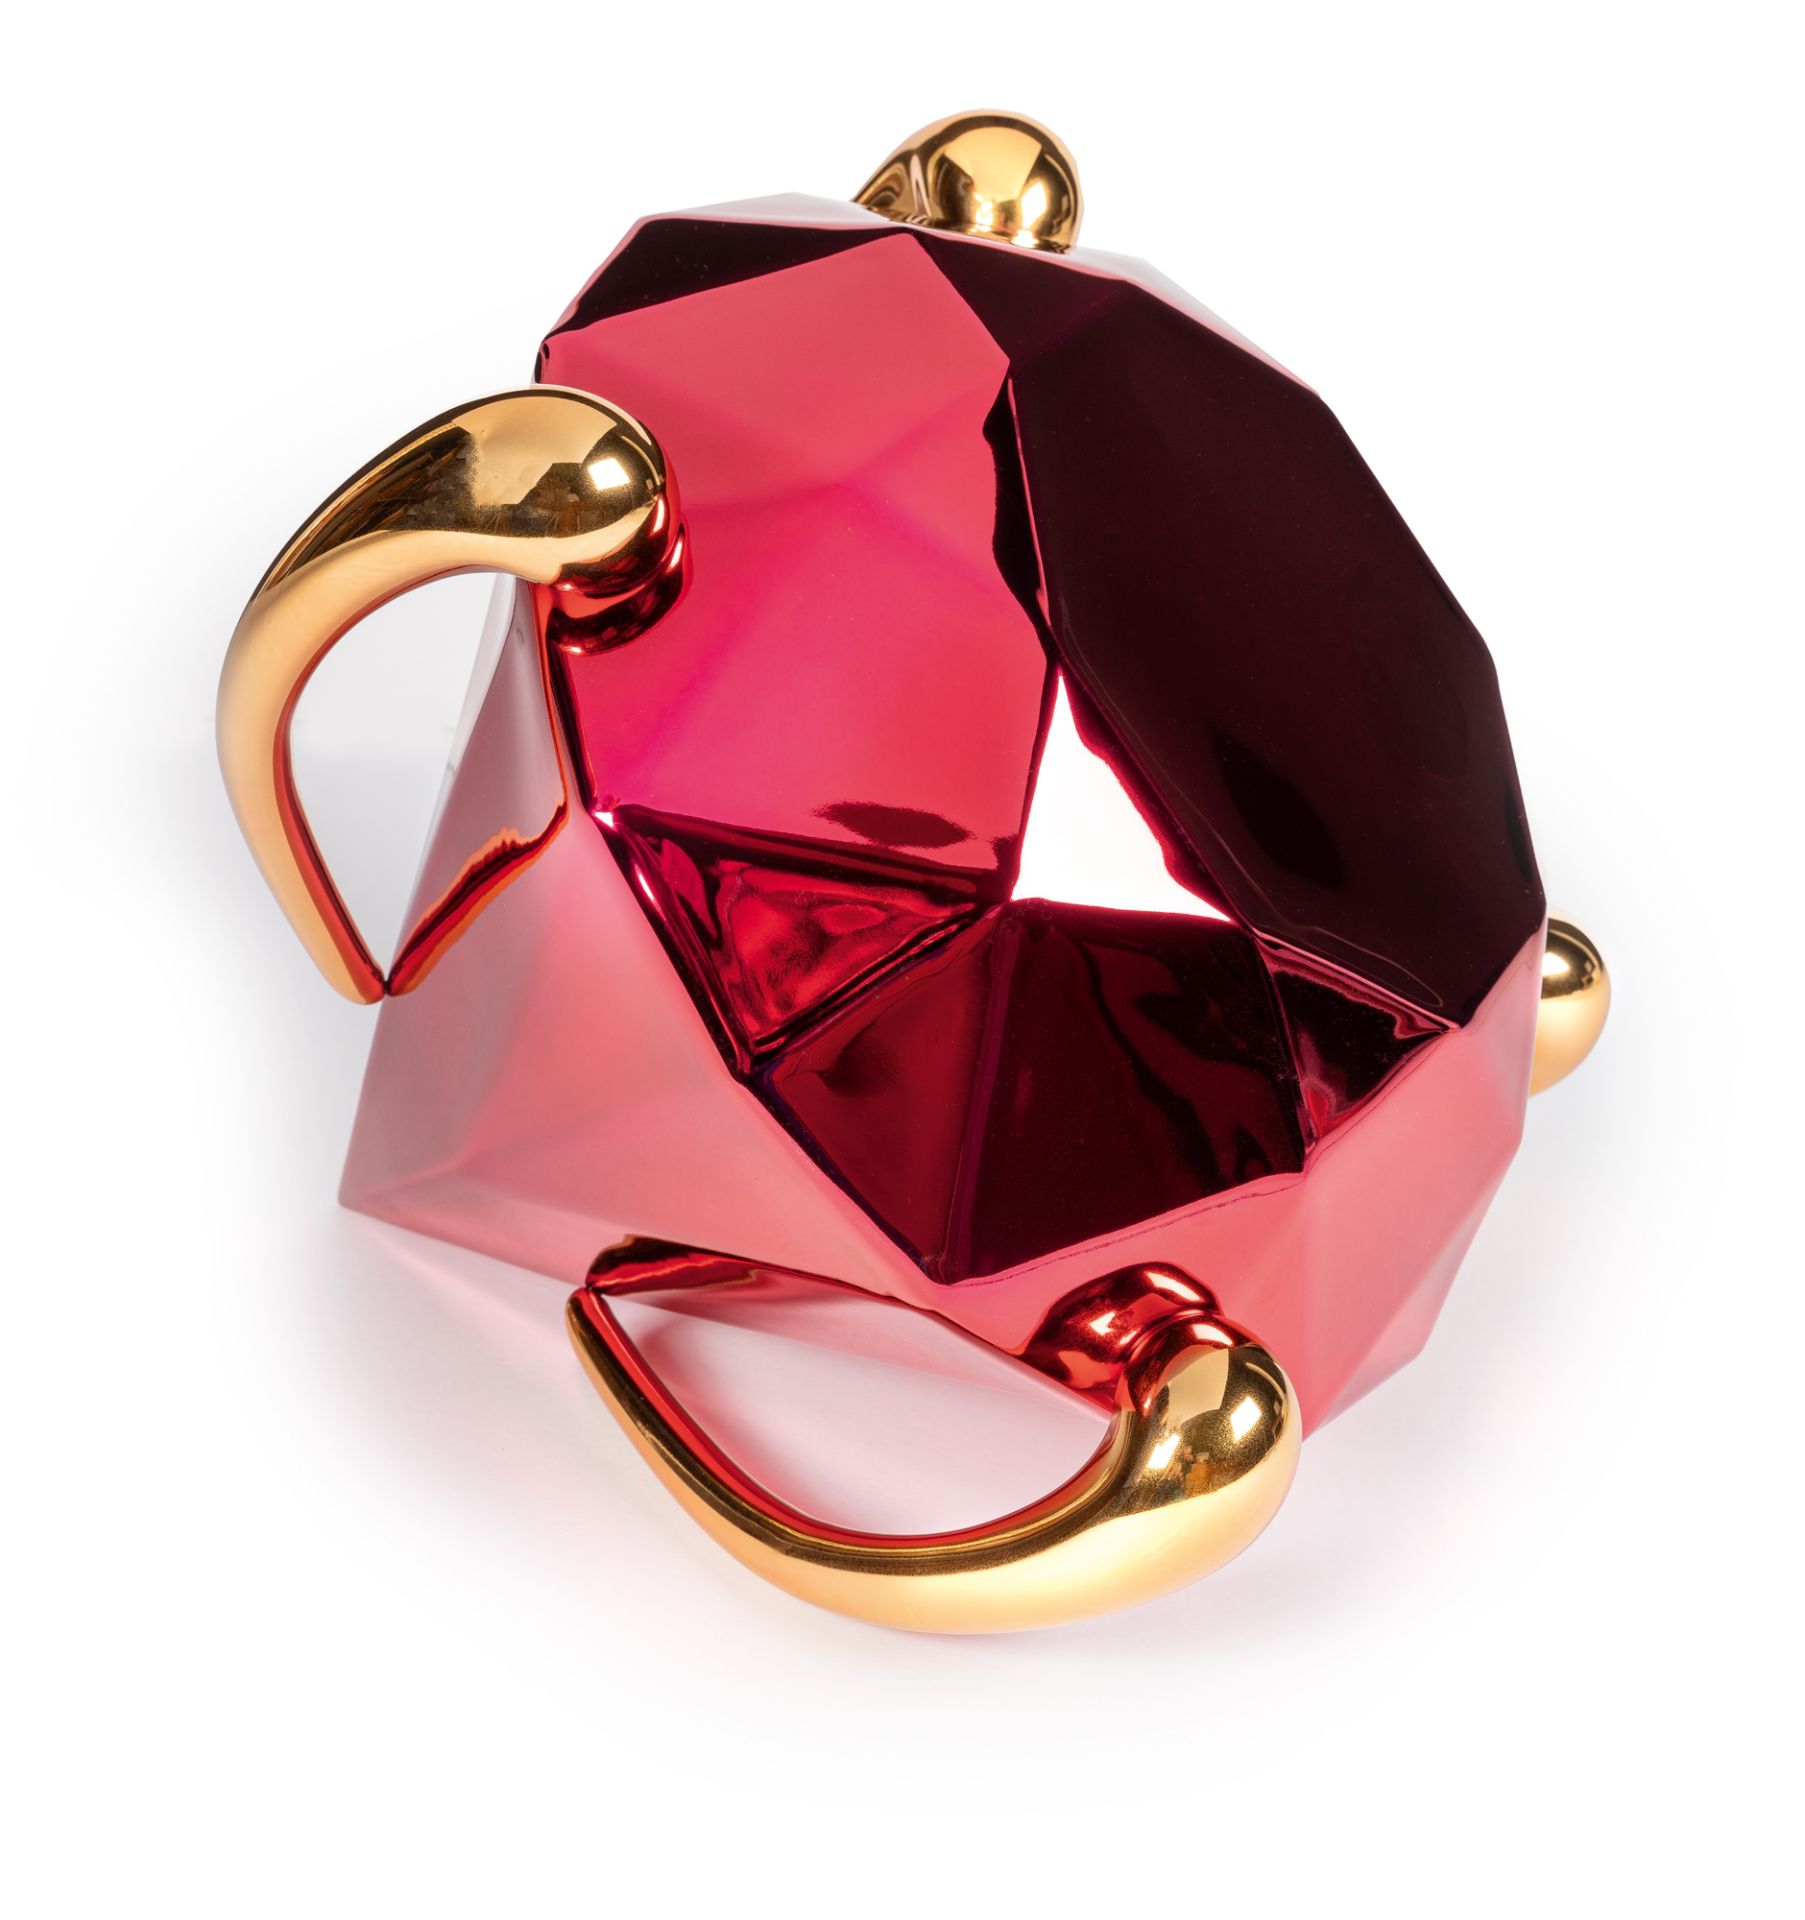 Jeff Koons, Diamond (red).Porcelain with chromatic coating. (2020). Ca. 32.5 x 39 x 32 cm. A - Image 3 of 6